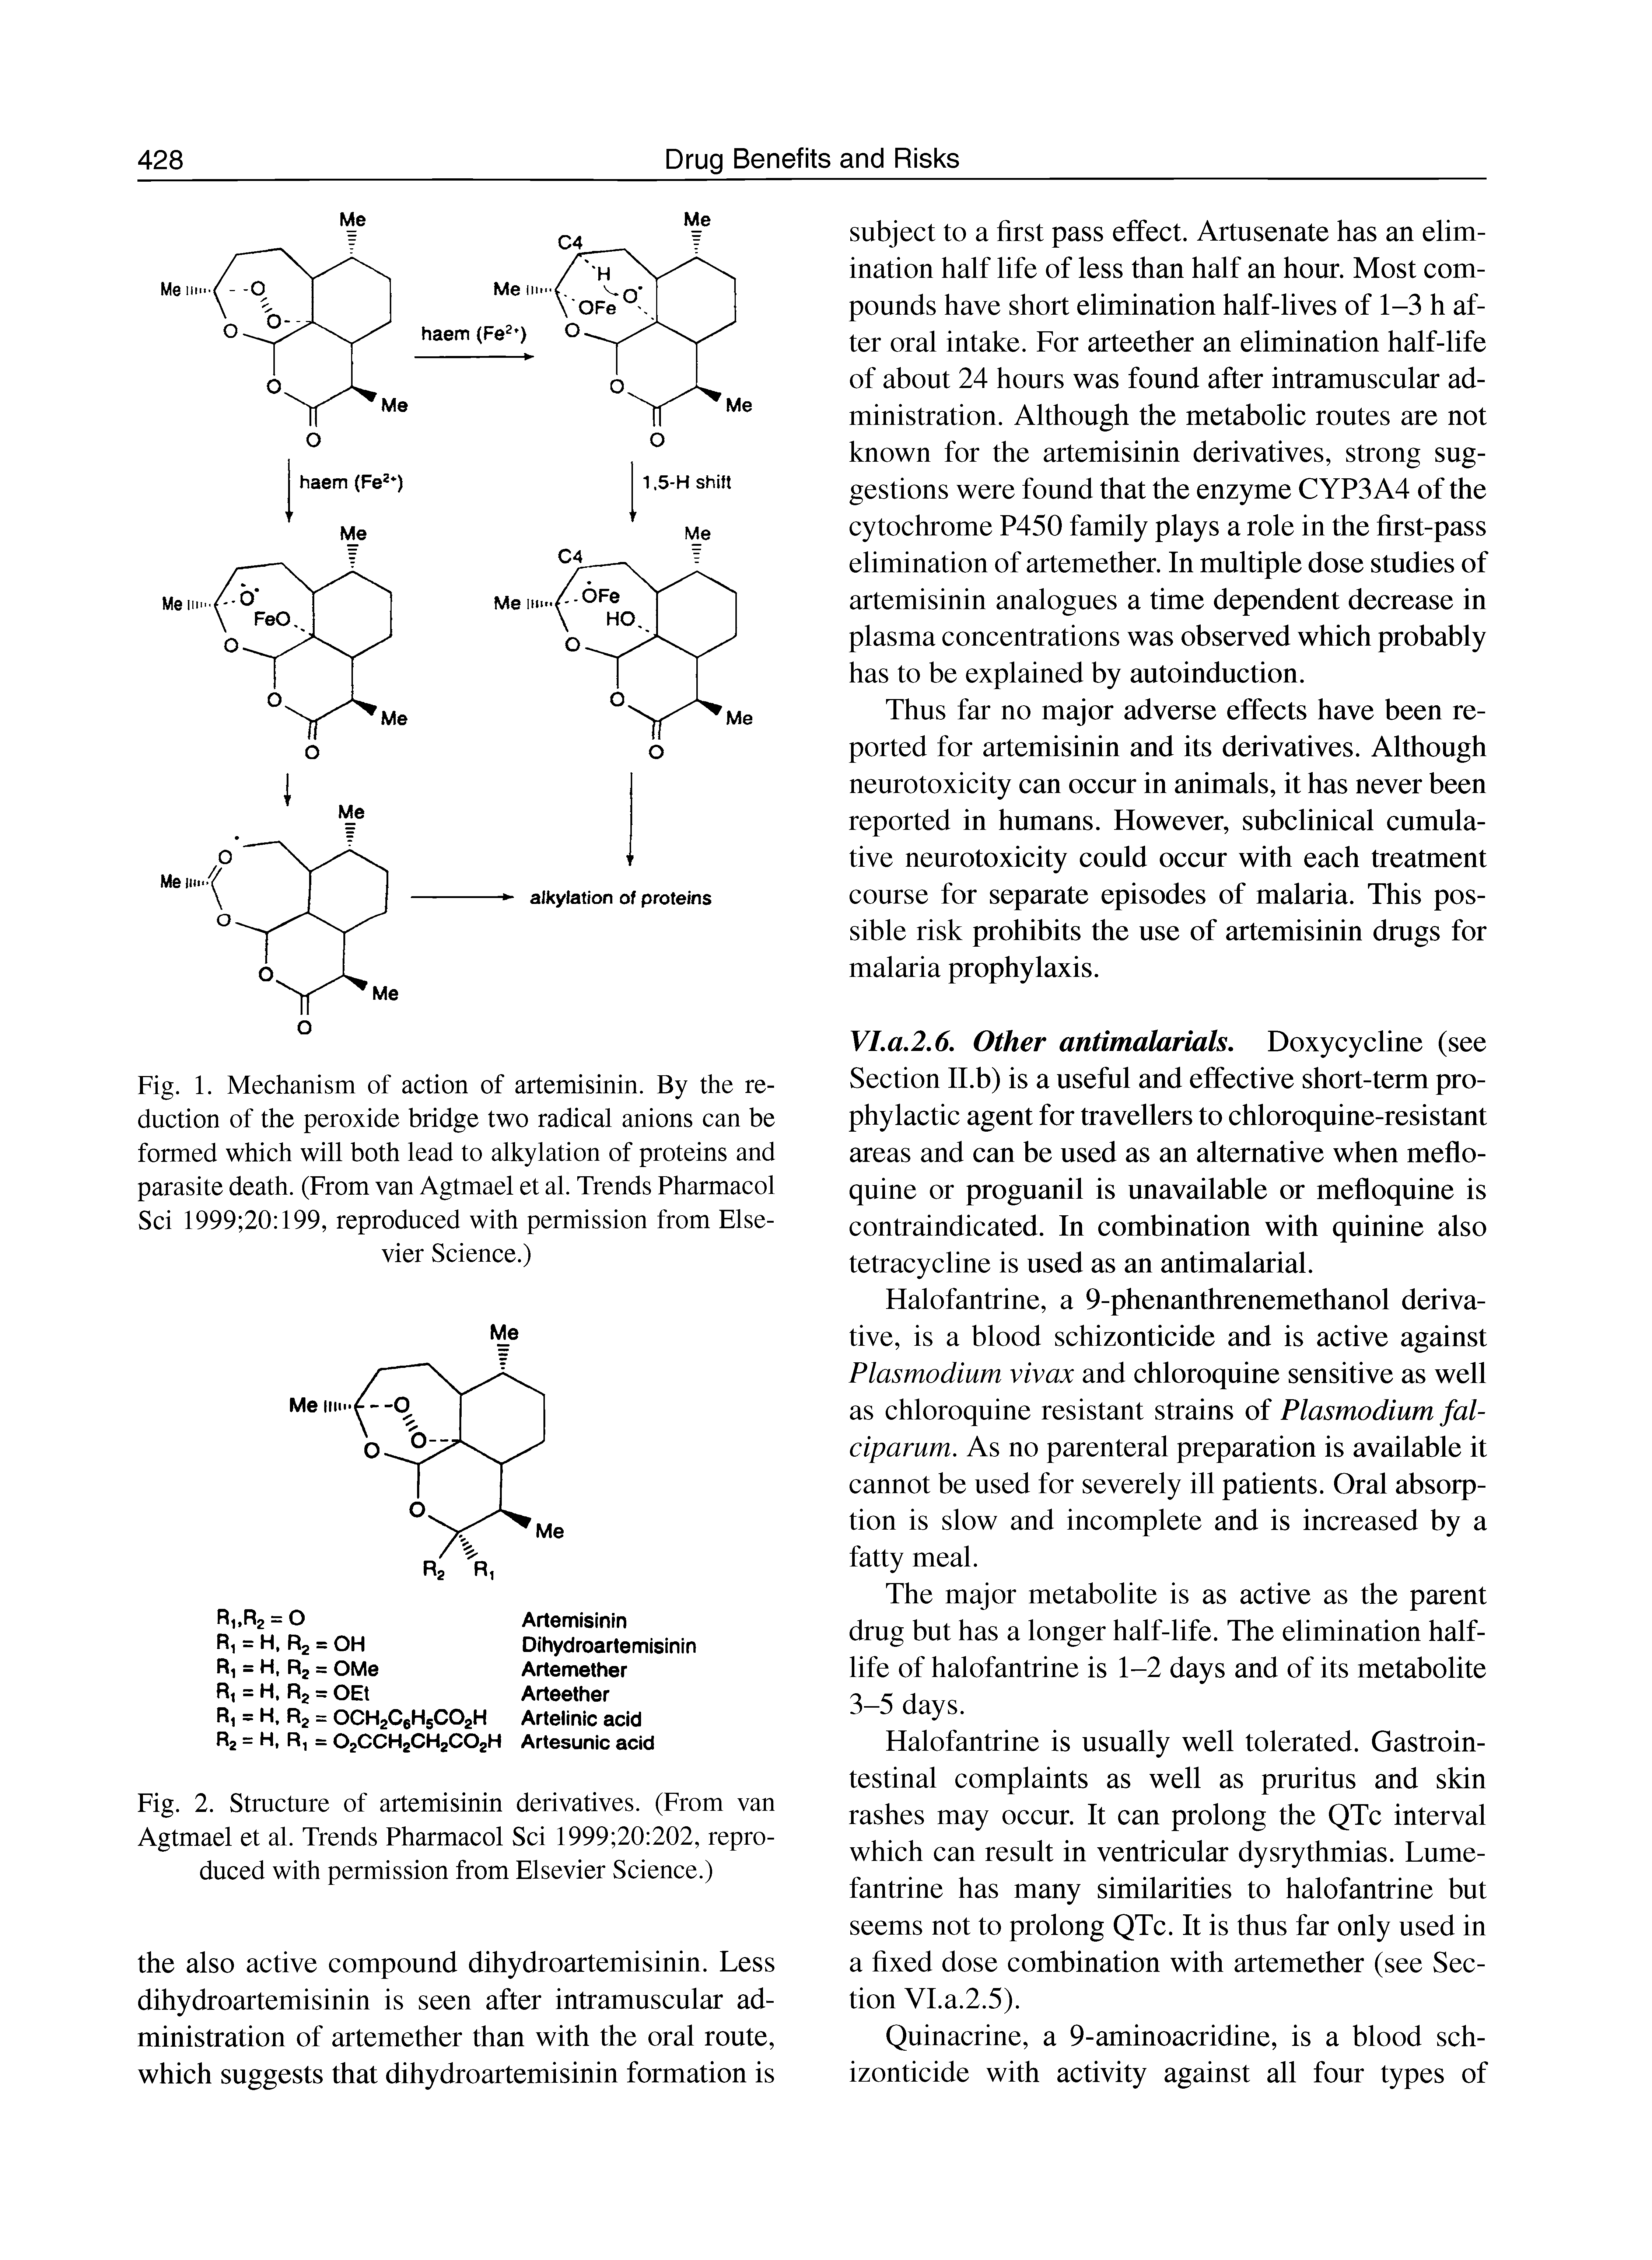 Fig. 1. Mechanism of action of artemisinin. By the reduction of the peroxide bridge two radical anions can be formed which will both lead to alkylation of proteins and parasite death. (From van Agtmael et al. Trends Pharmacol Sci 1999 20 199, reproduced with permission from Elsevier Science.)...